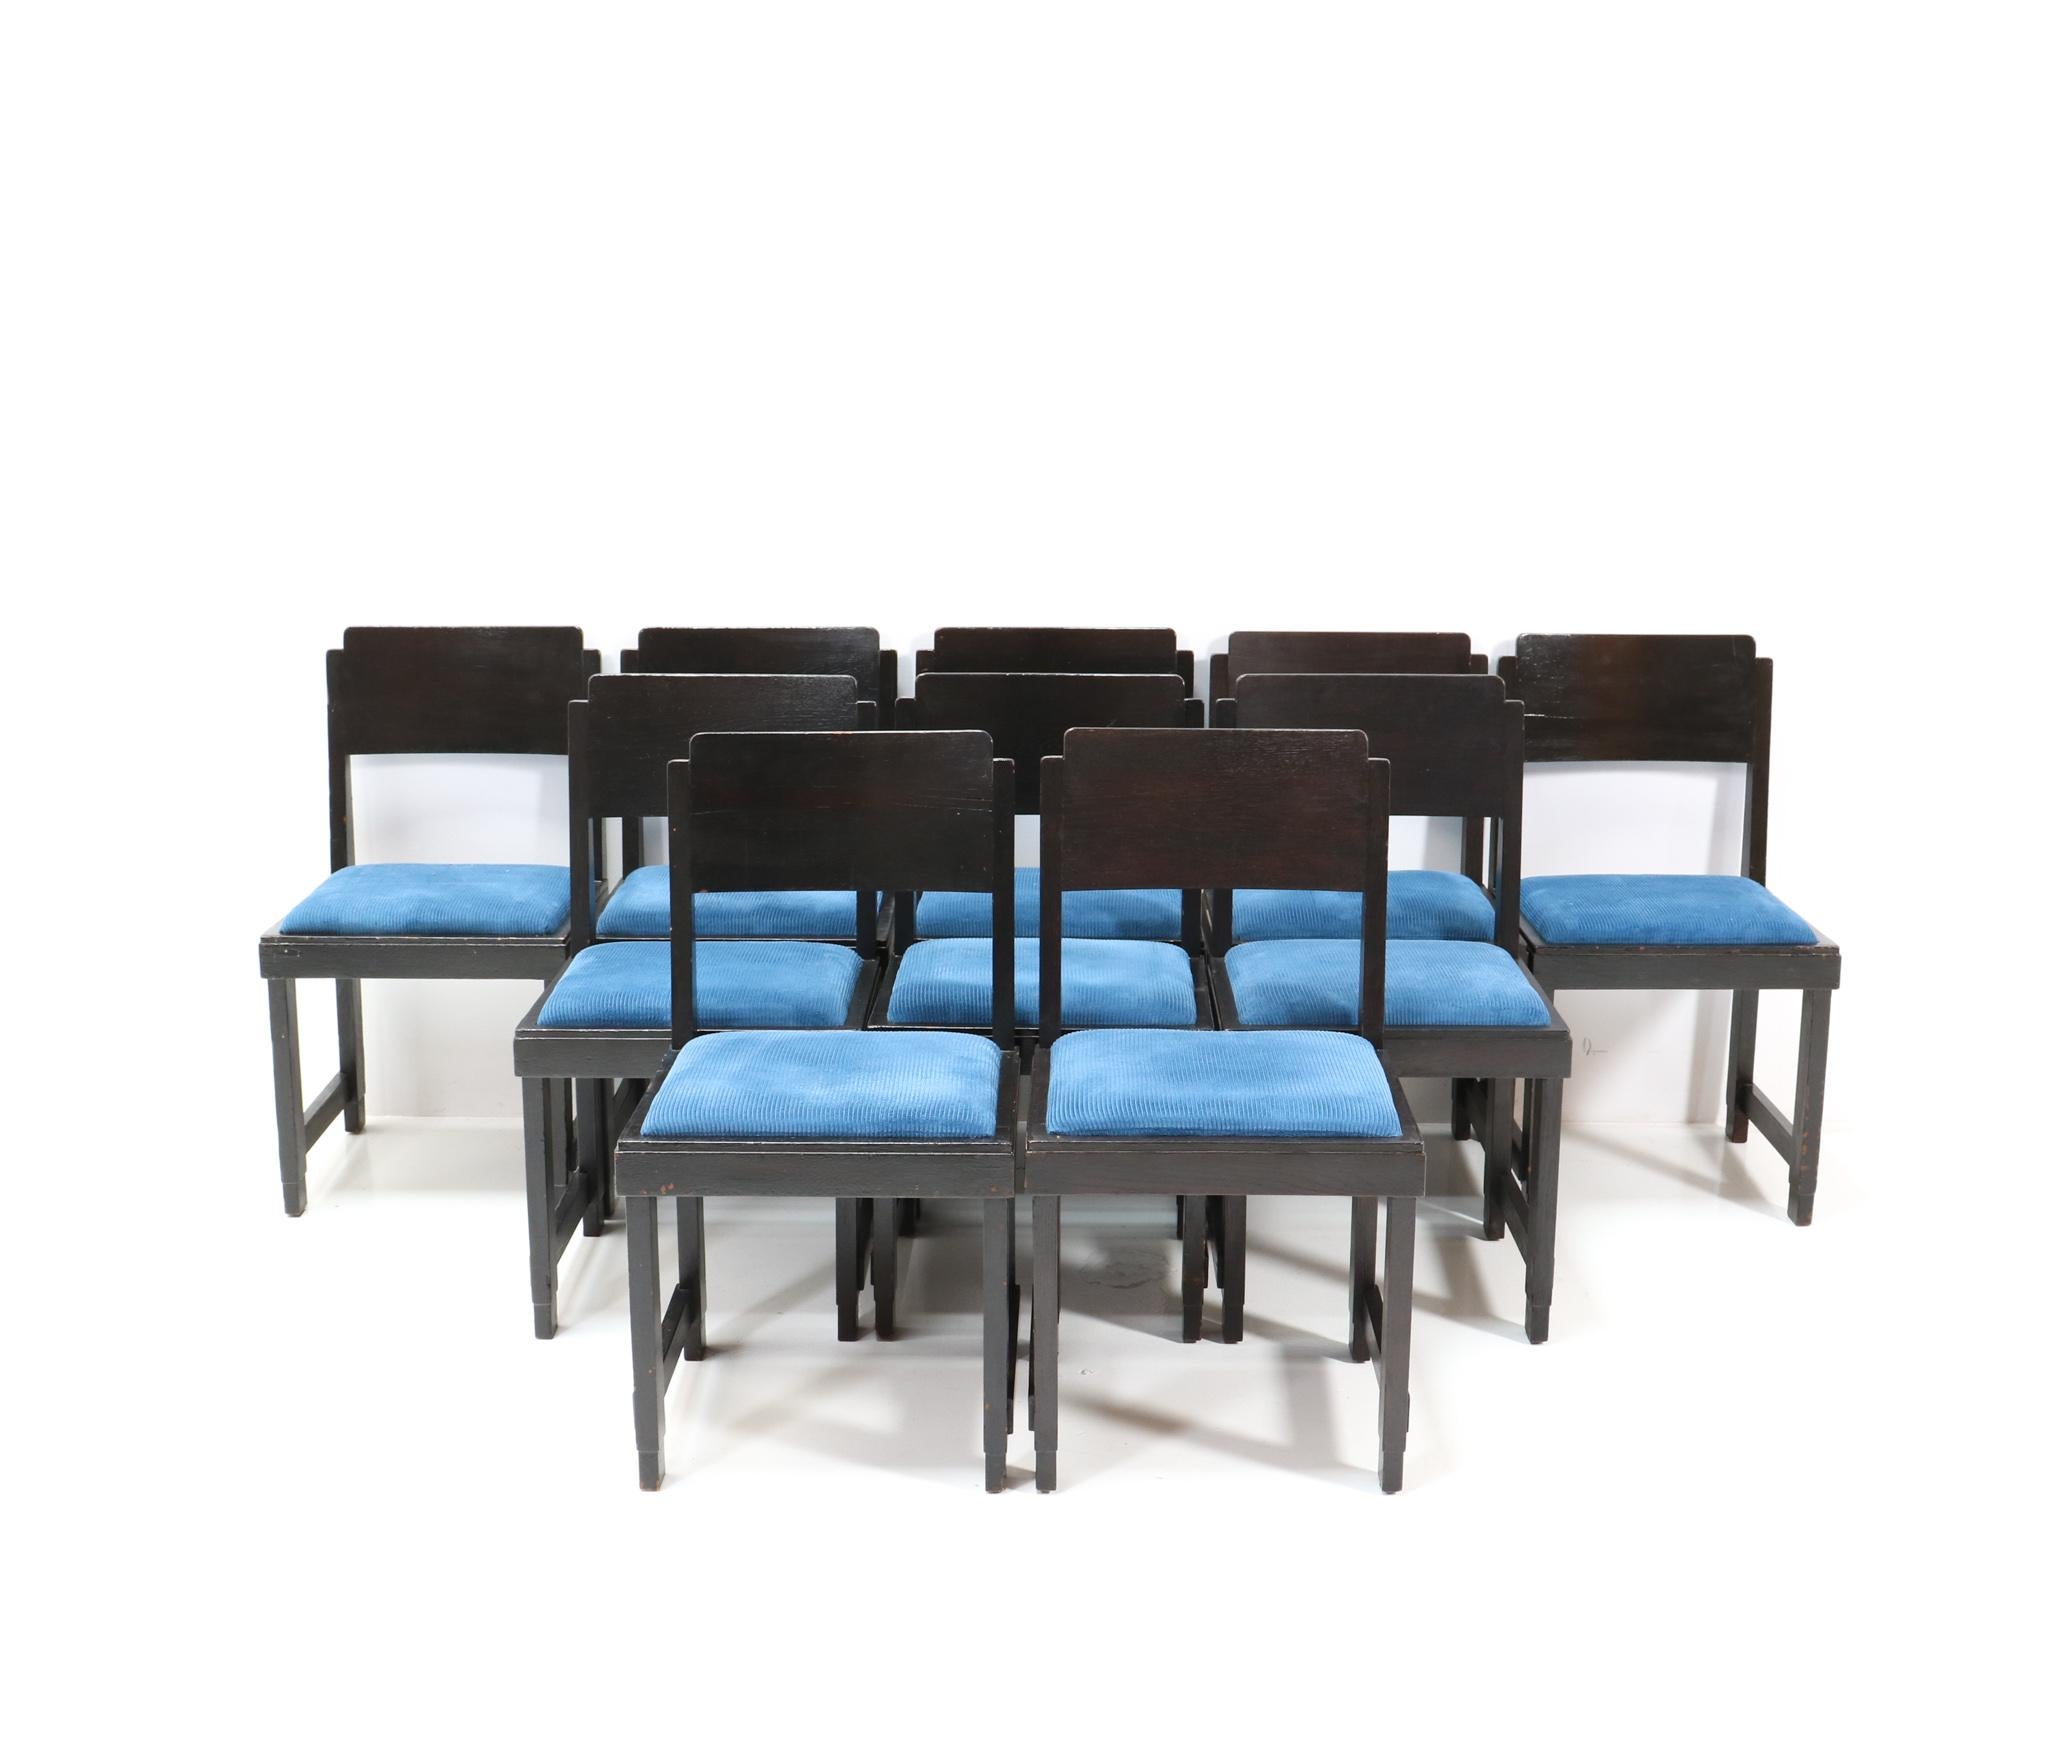 Dutch Set of Ten Art Deco Modernist Dining Room Chairs by Frits Spanjaard, 1920s For Sale